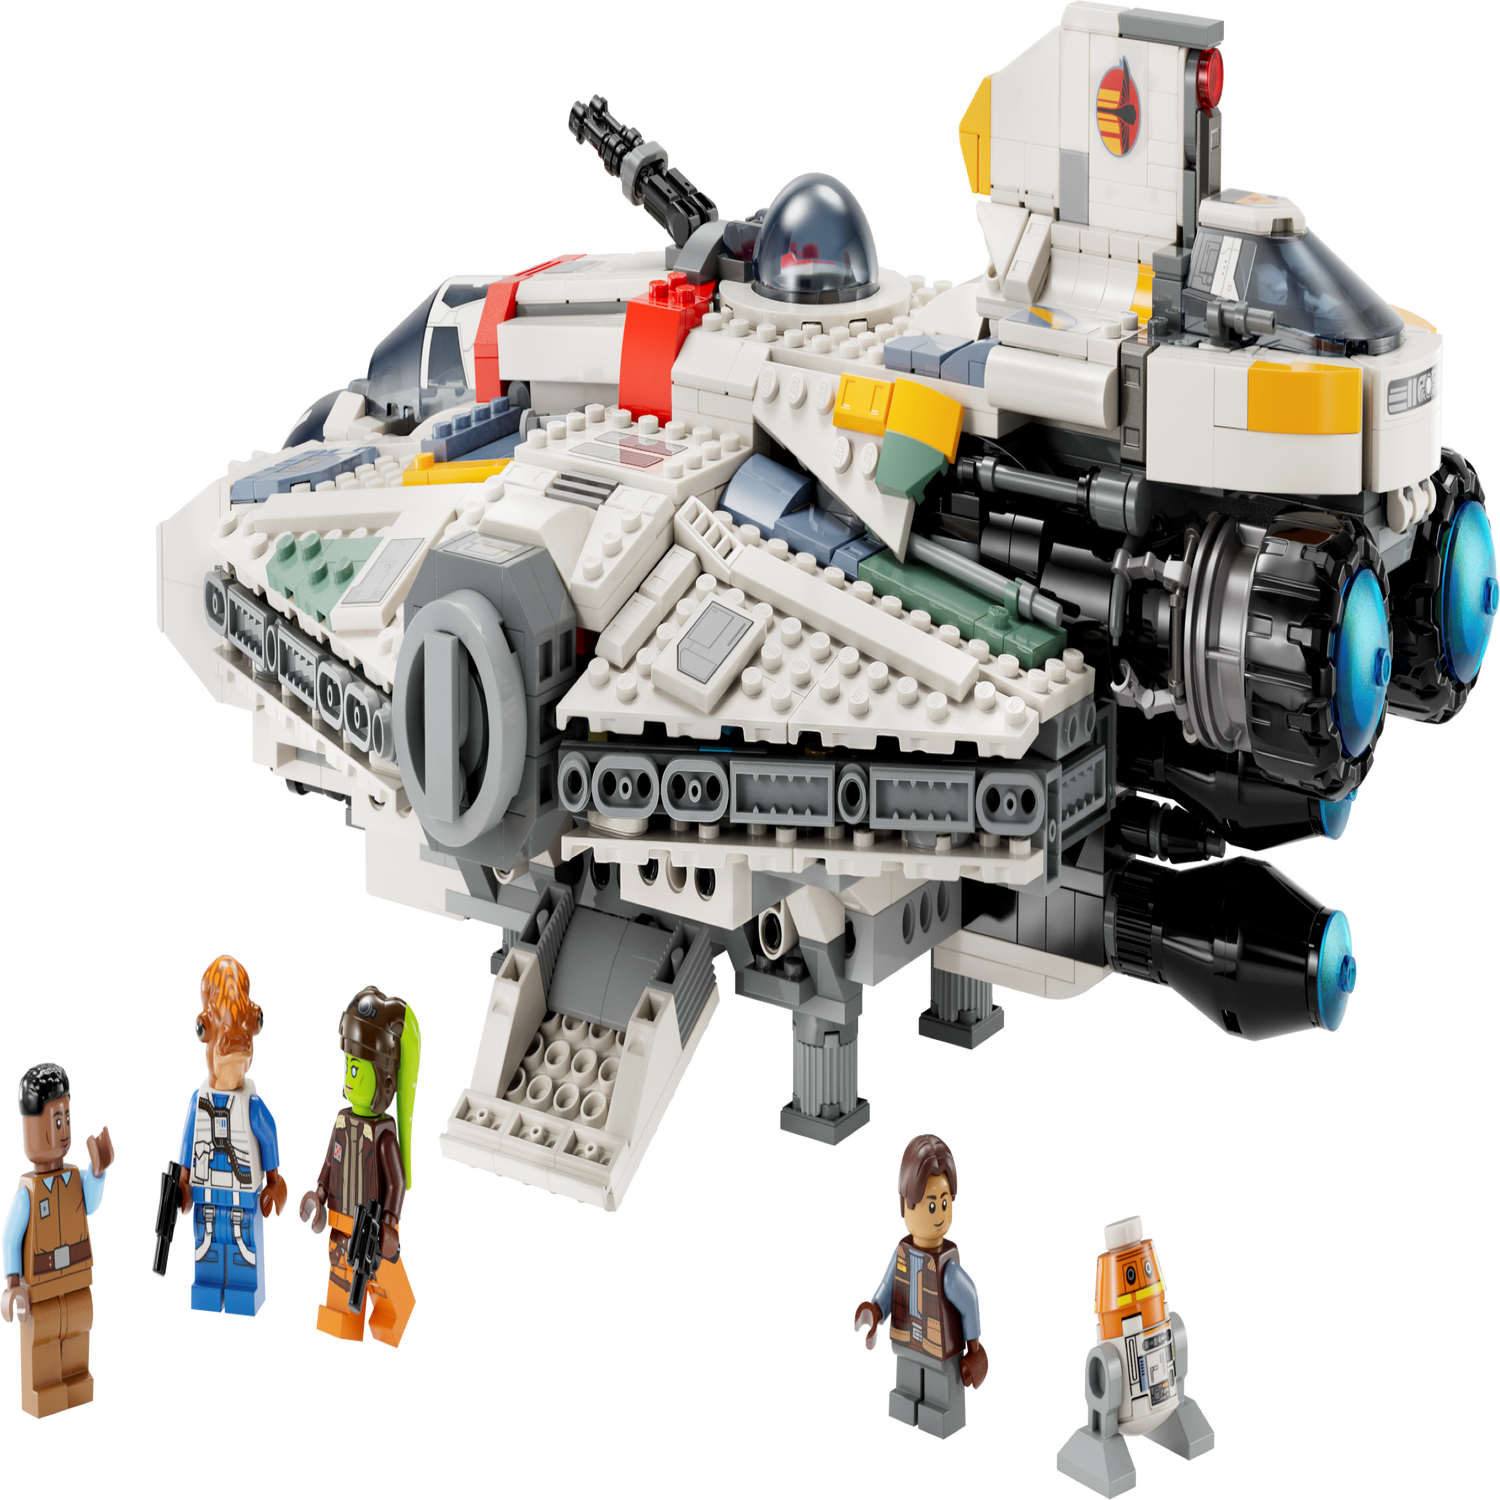 LEGO® Star Wars™ Special Offers and Deals